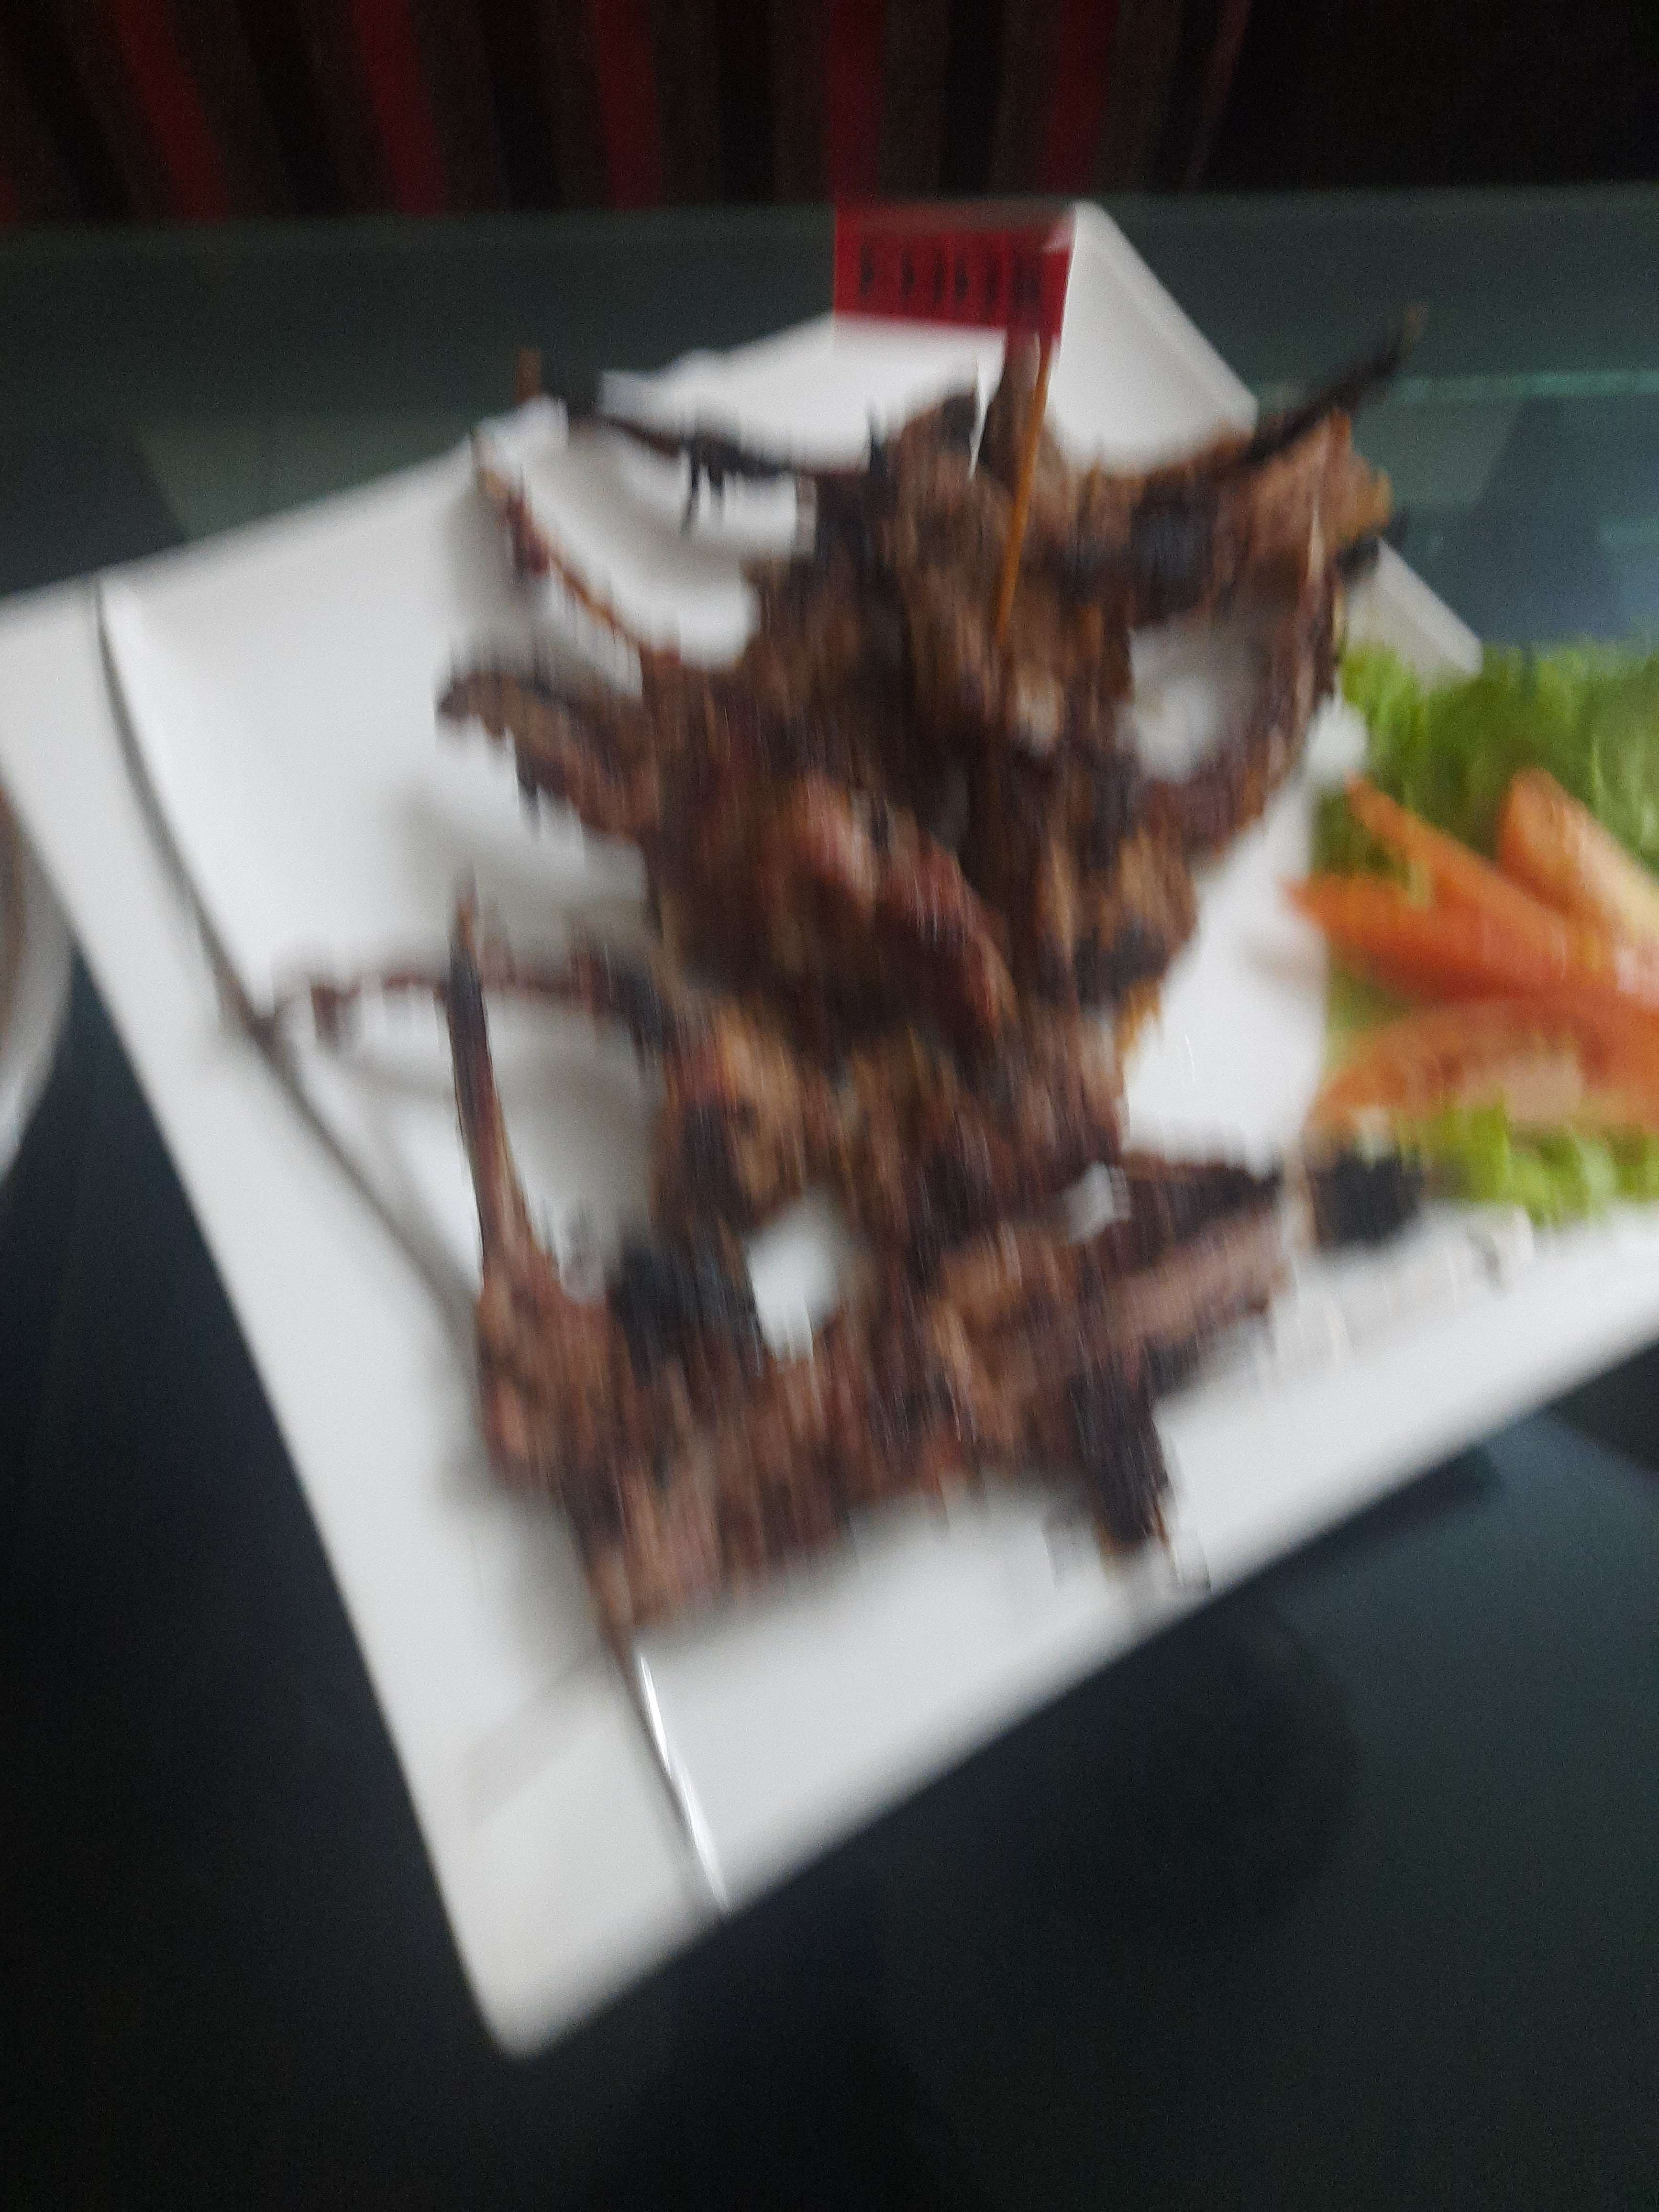 Delicious Lamb Chops prepared by COOX